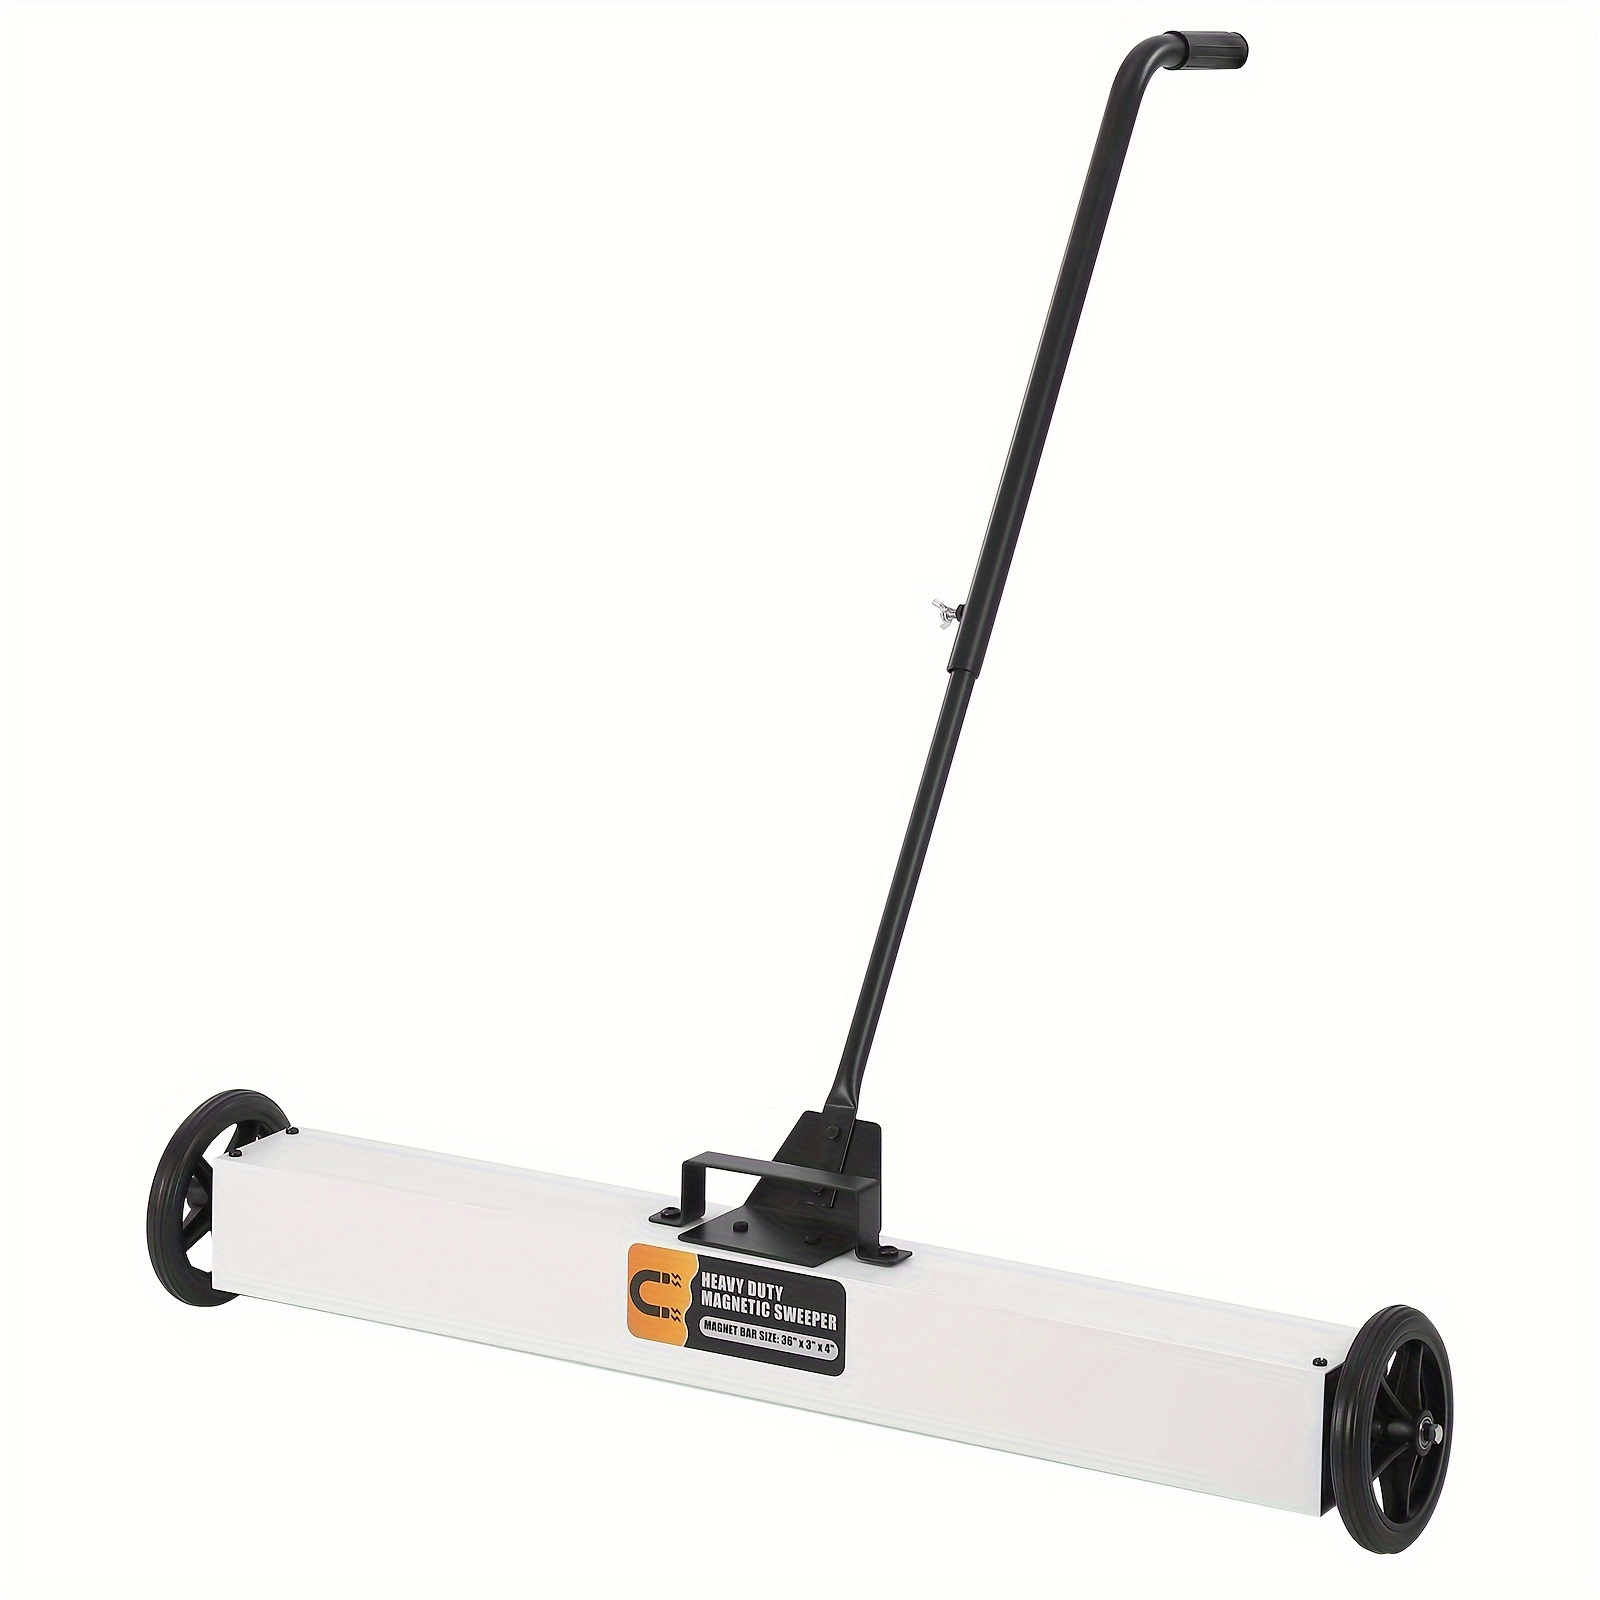 

Magnetic Sweeper 36 Inch, Magnetic Pickup Tool With Wheels And Adjustable Telescoping Handle, Magnet Sweeper To Pick Up Nails With Quick Release Latch, 55-pound Capacity